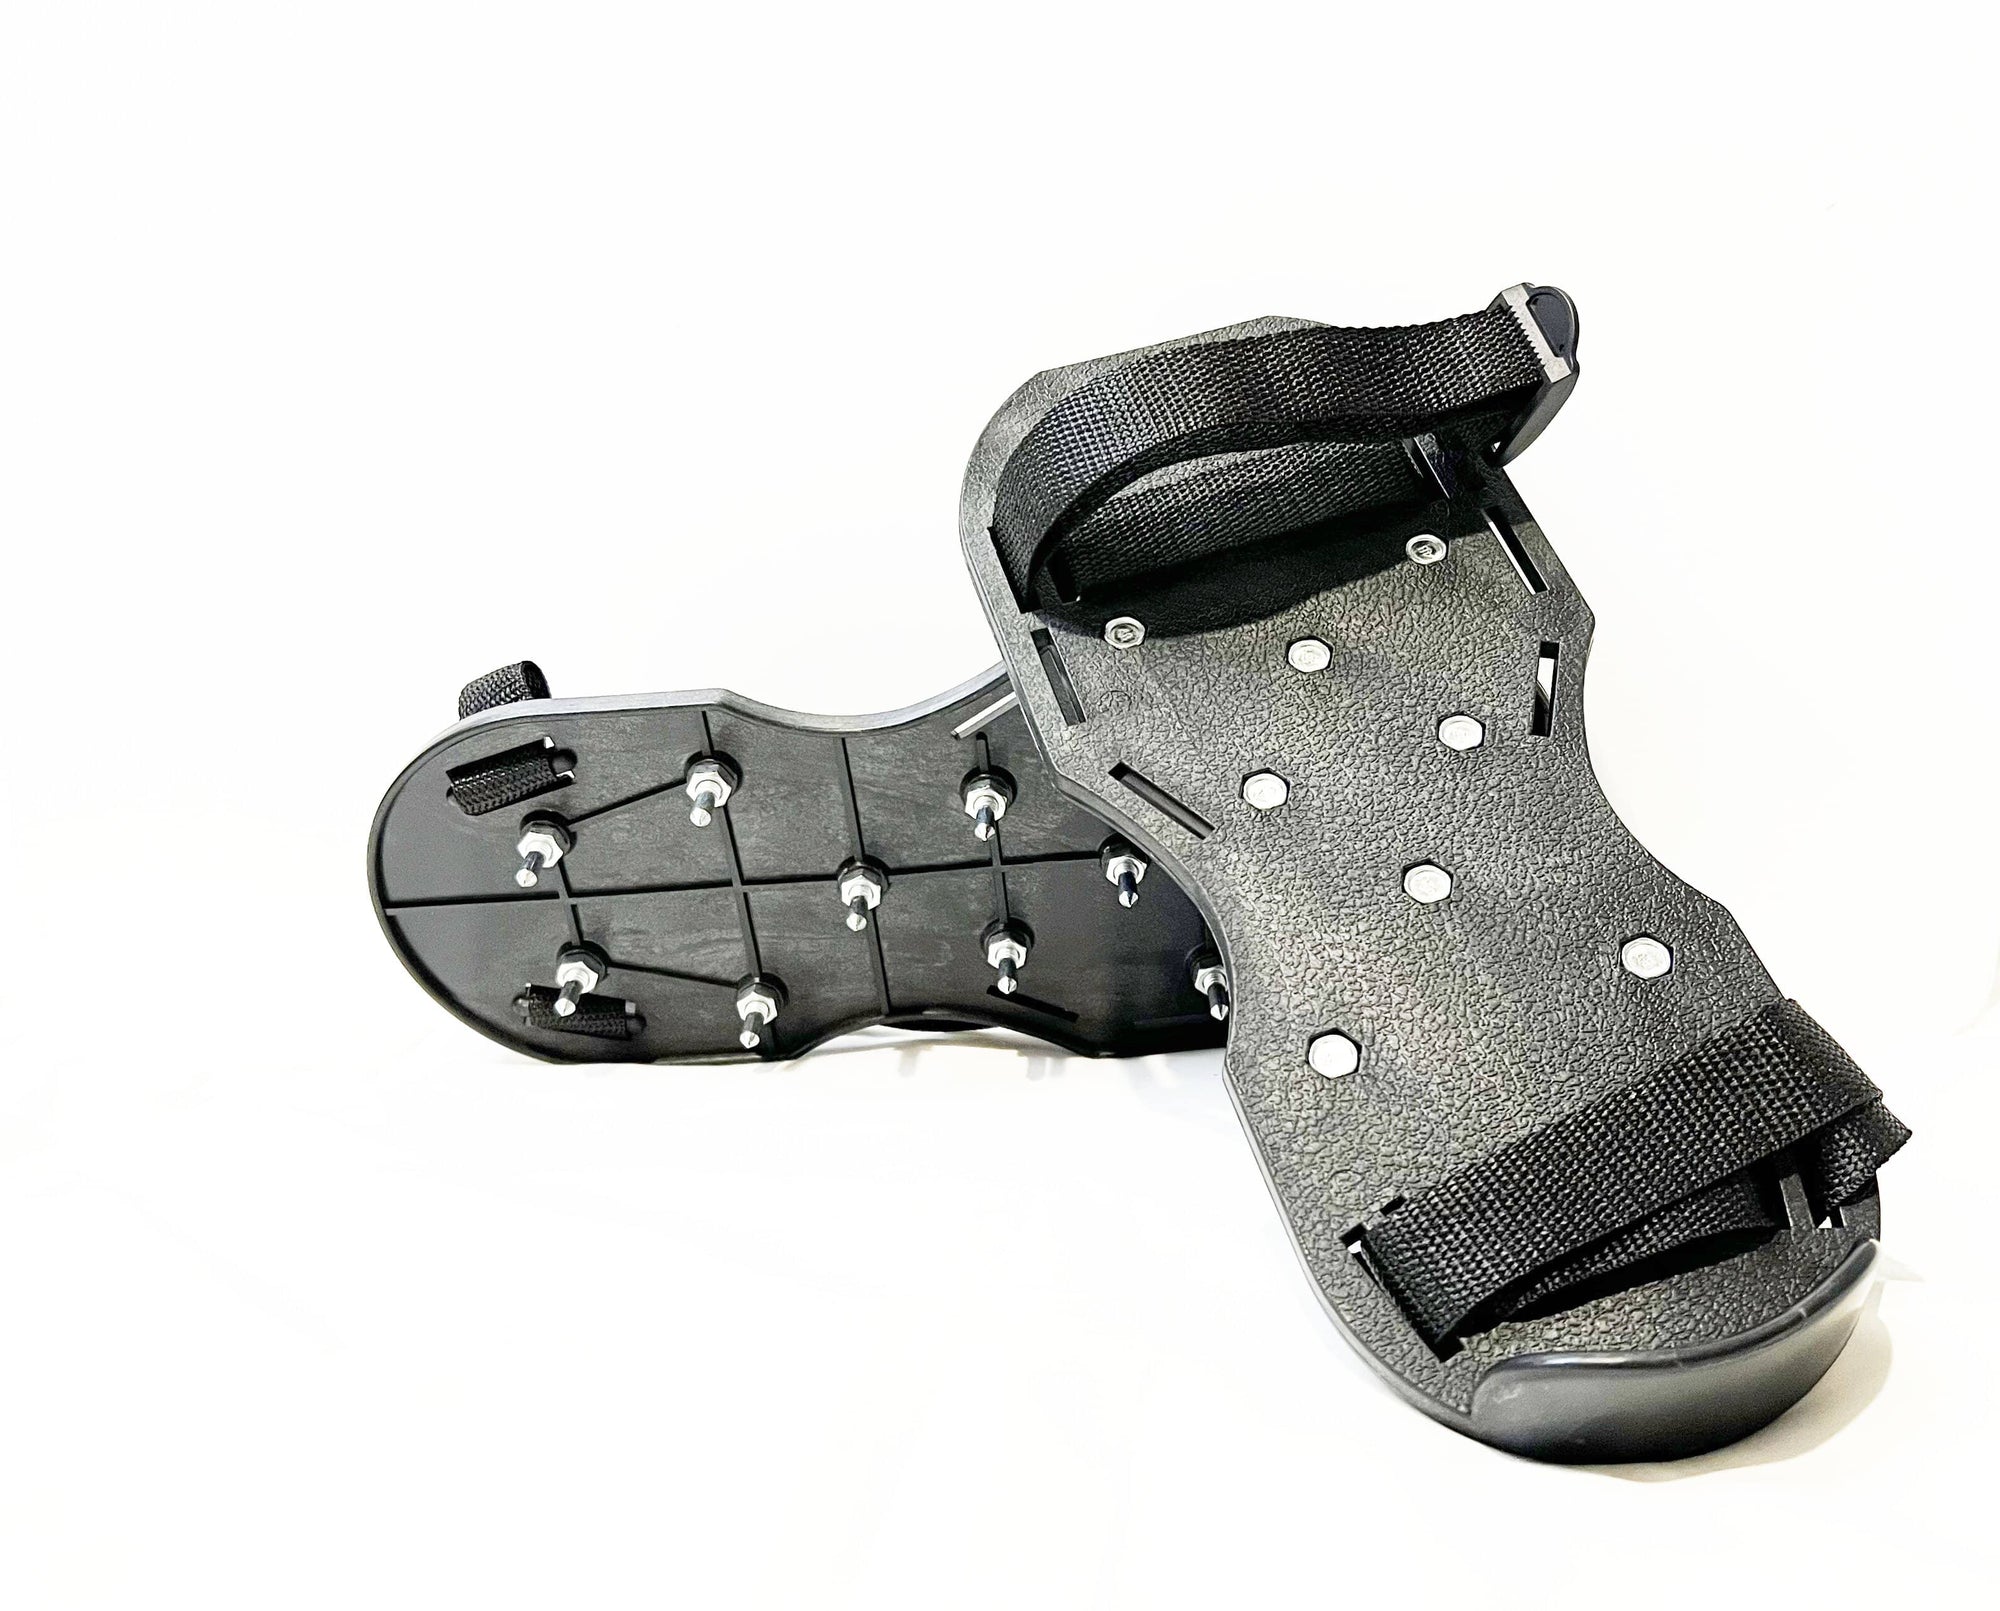 Polypropylene Spiked shoes with ¾” spikes (Pair)